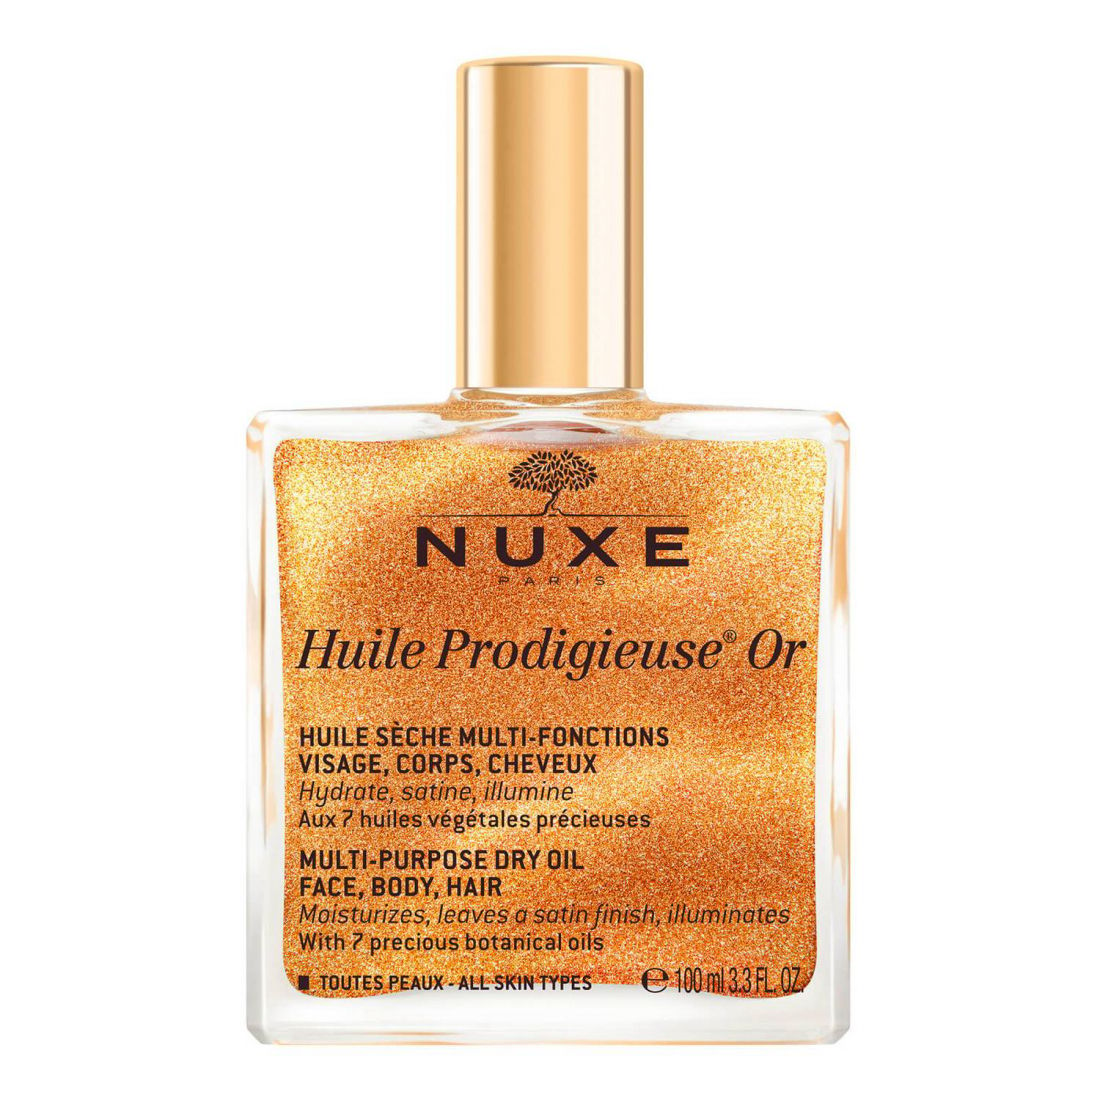 Nuxe - Huile visage, corps et cheveux 'Huile Prodigieuse® Or' - 100 ml